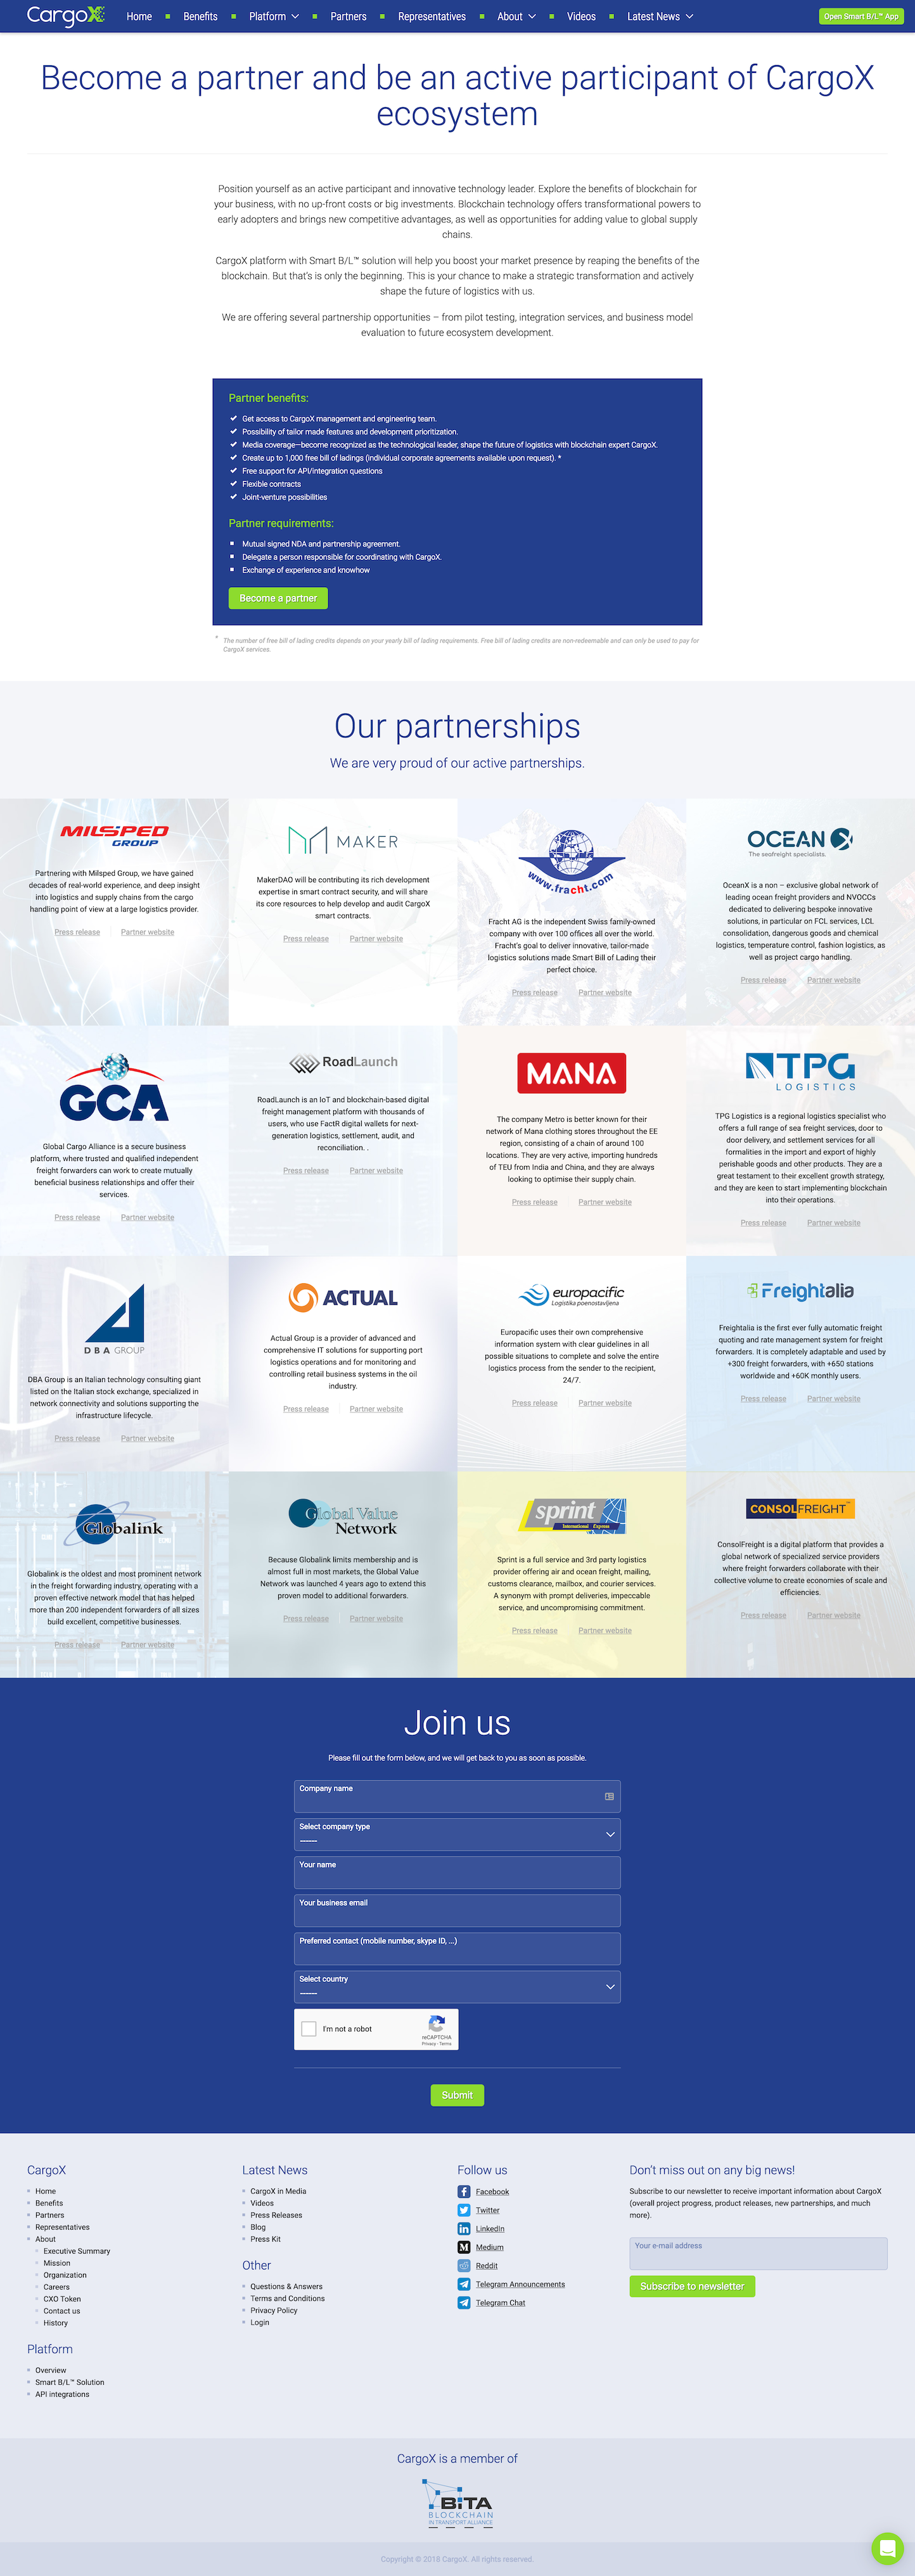 Screenshot of the Partners page from the CargoX website.